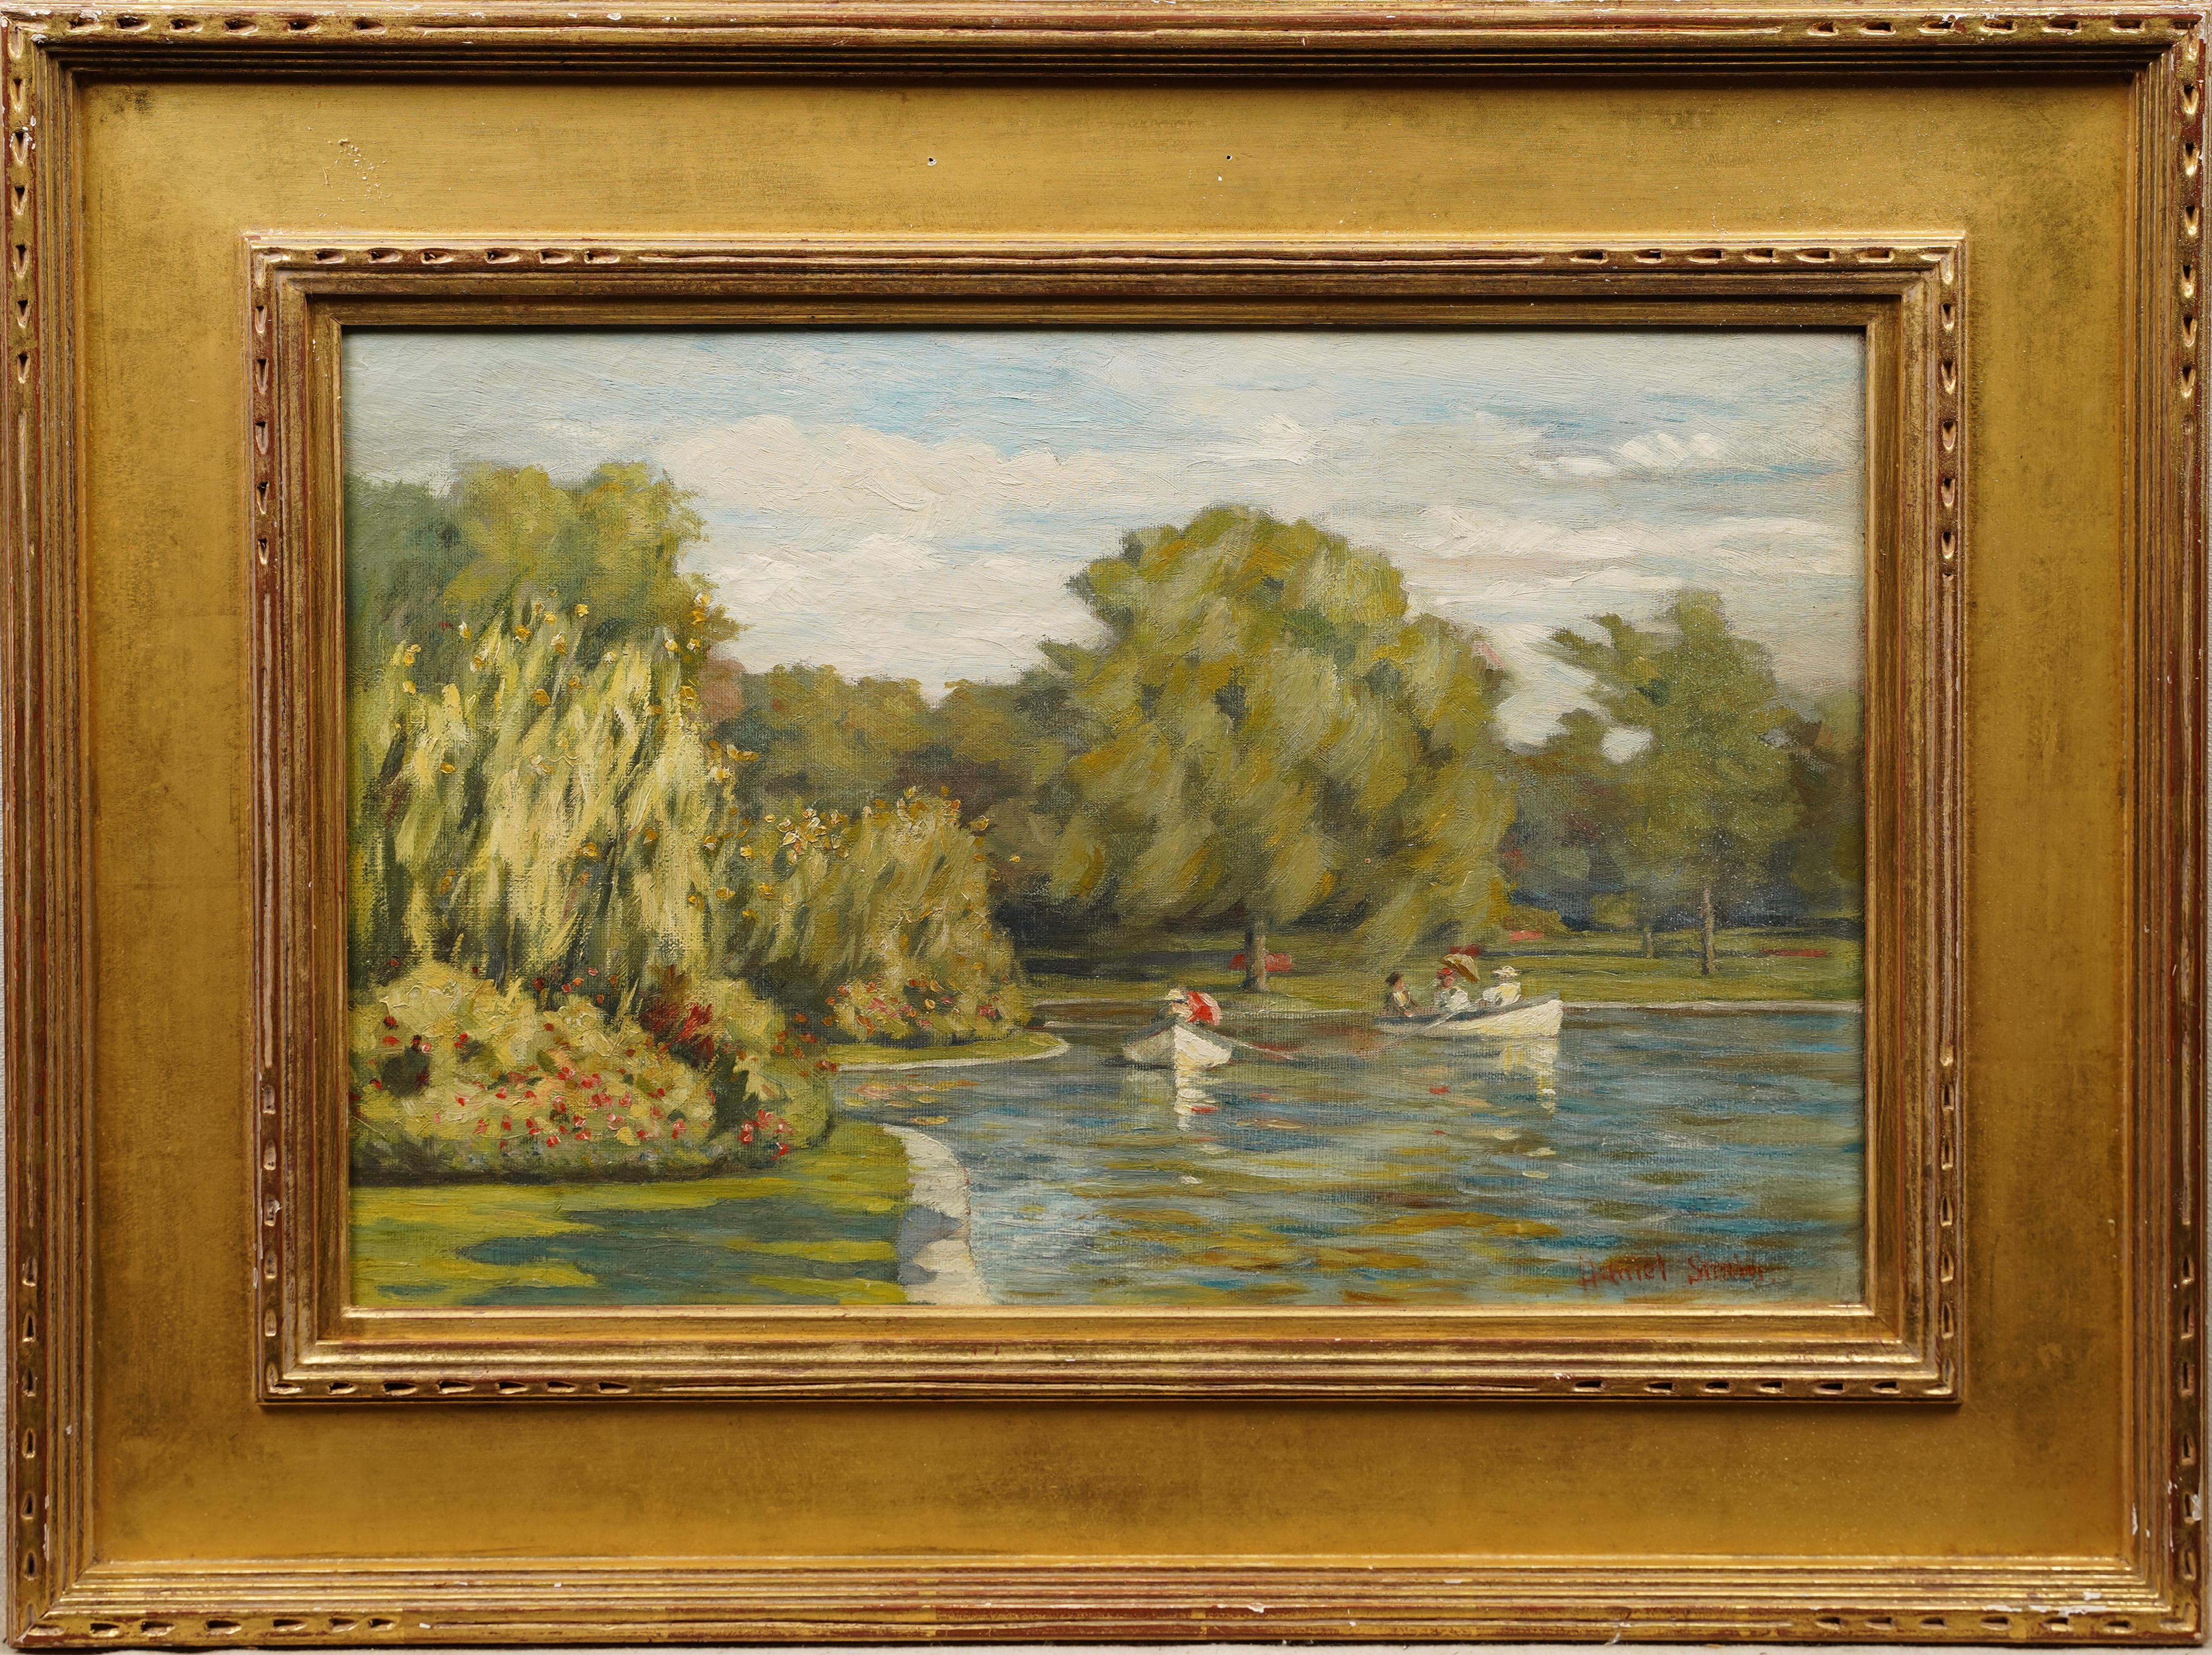 Antique American impressionist landscape oil painting.  Oil on canvas.  Framed.  Signed illegibly.  Appears to read 